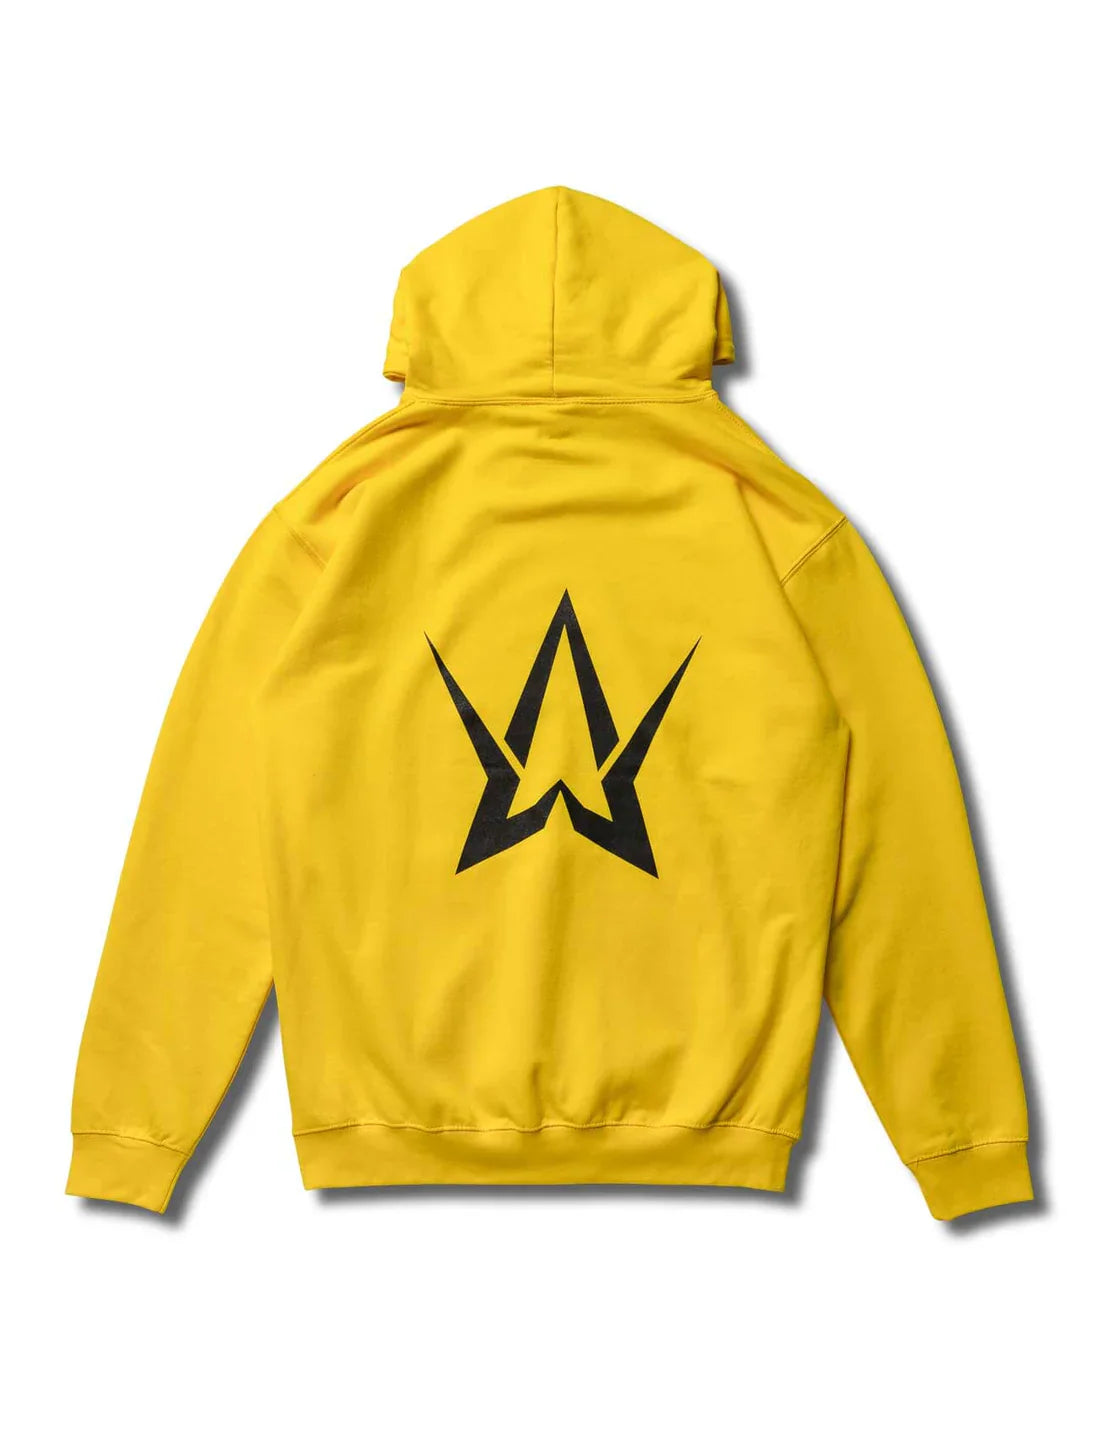 Back view of Yellow Walkerverse Stage Hoodie with oversized Alan Walker symbol.